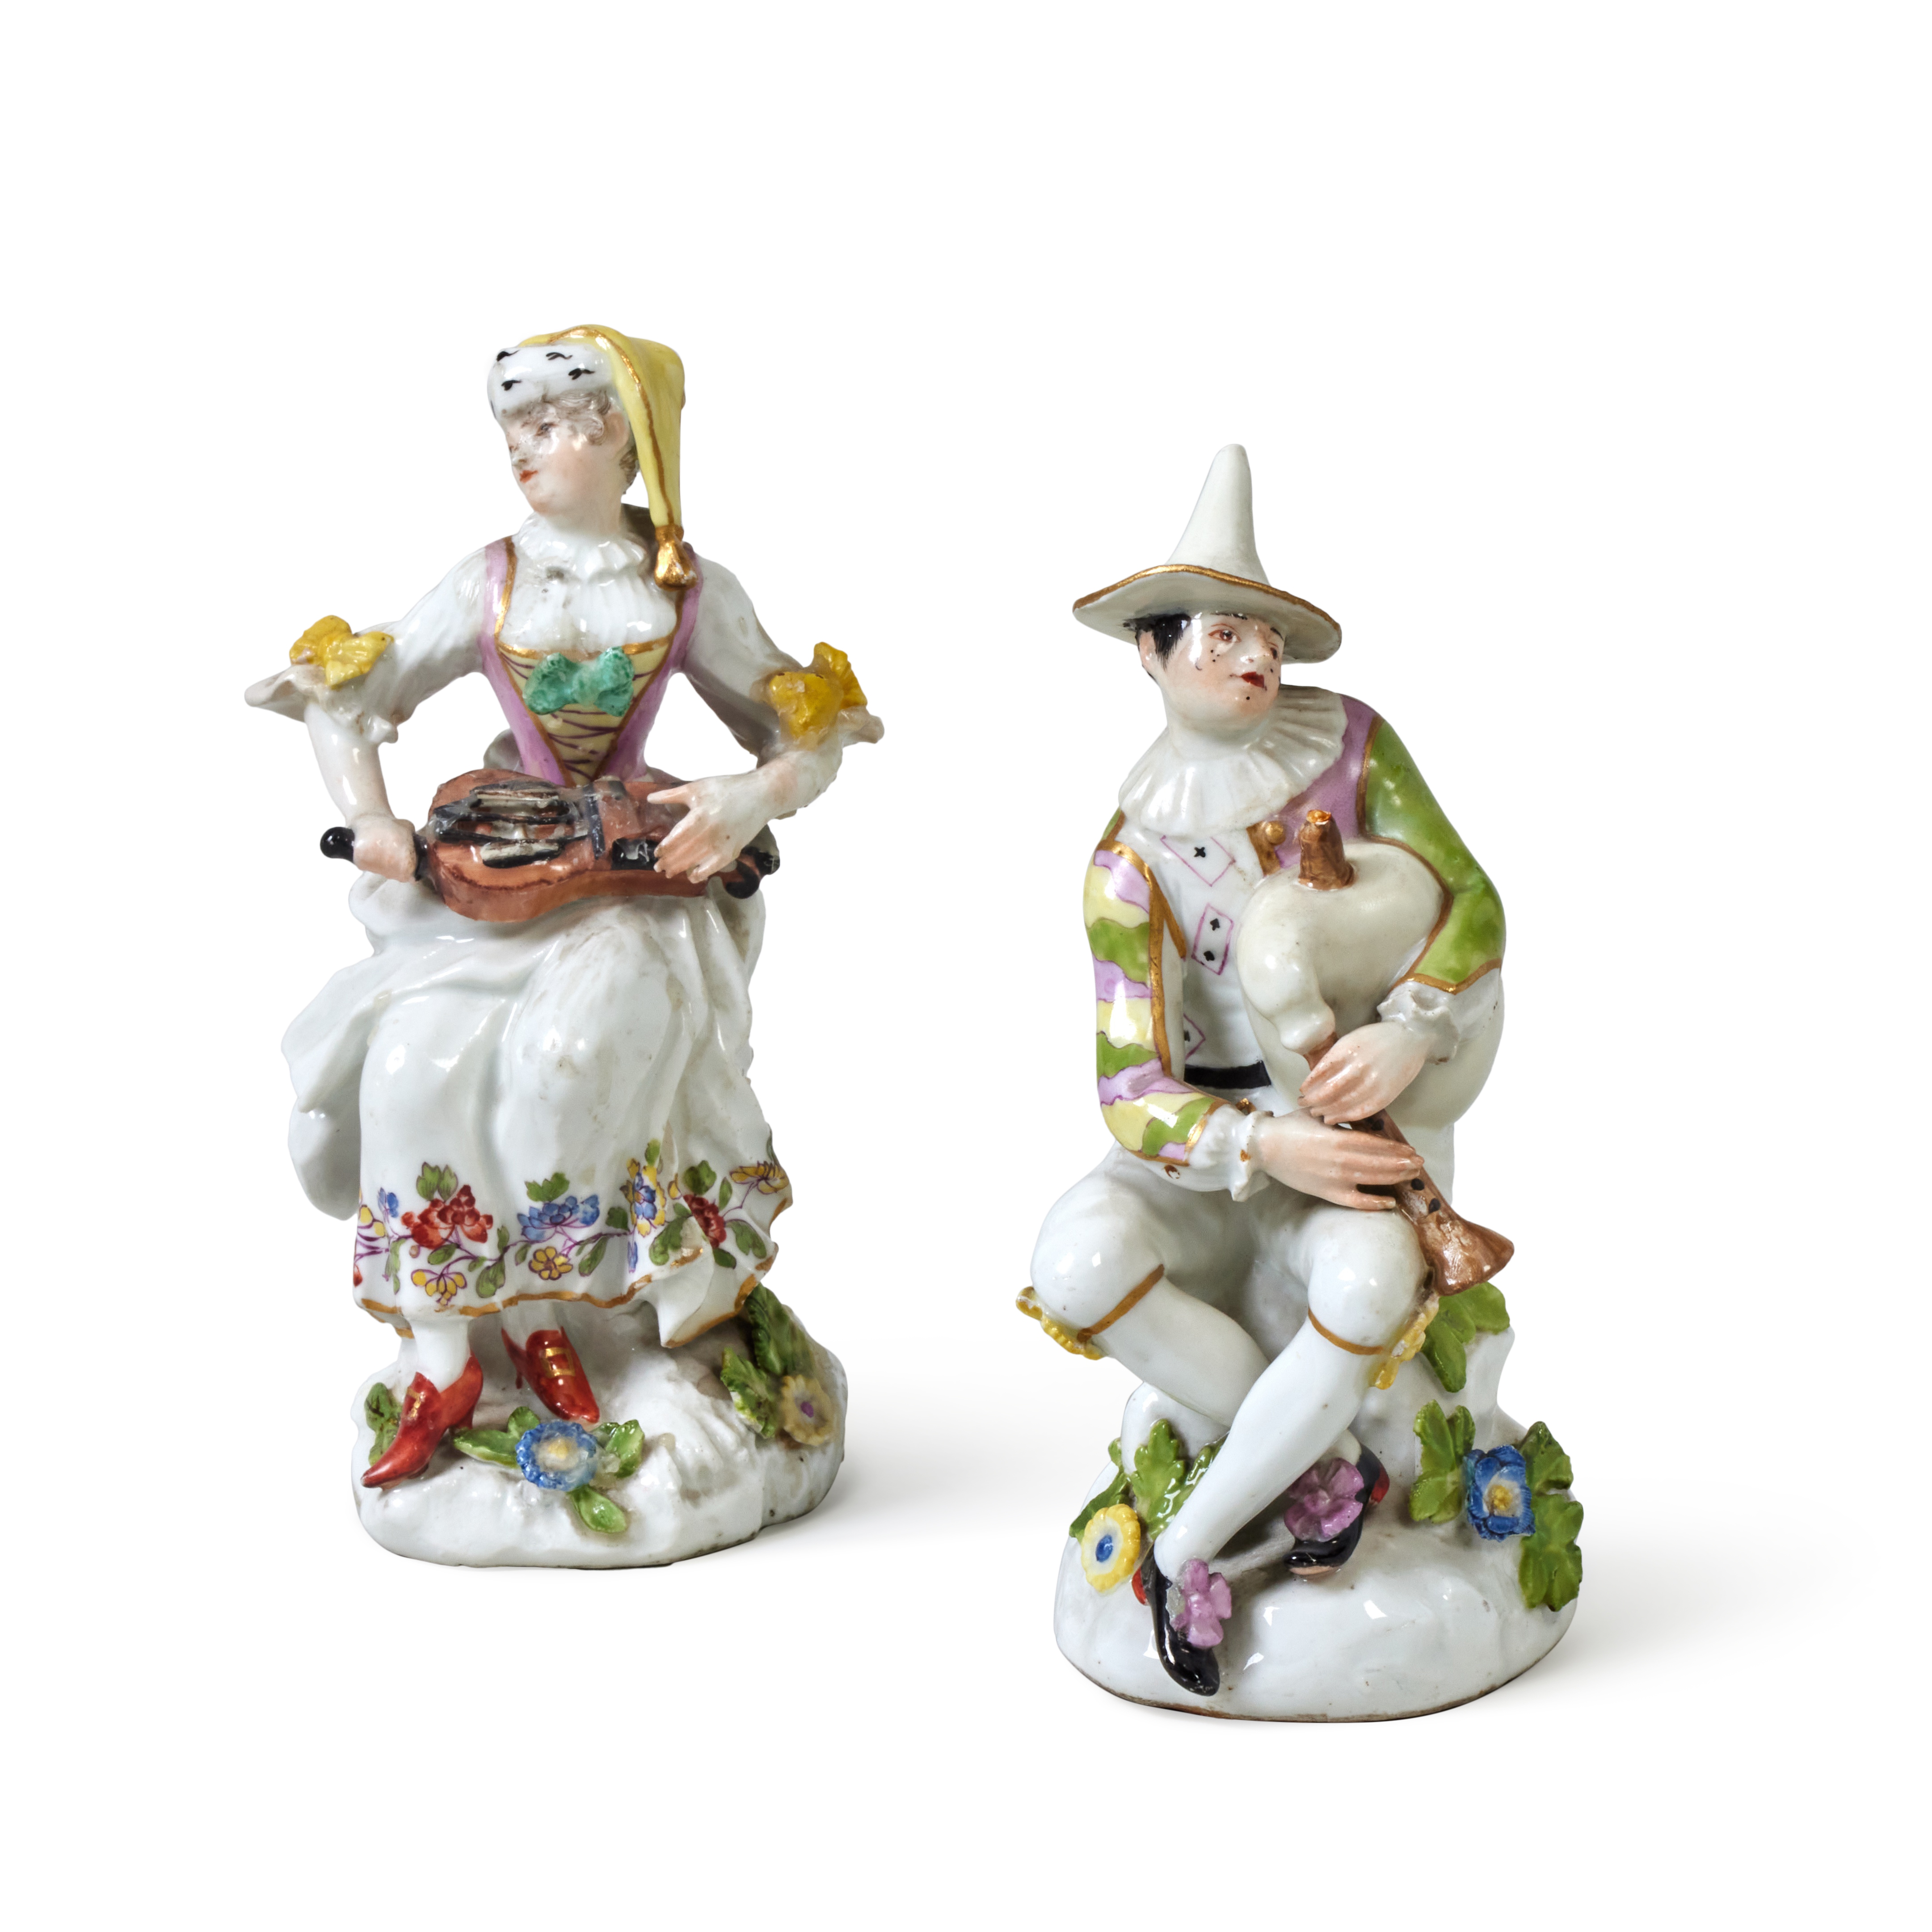 A Meissen Figure of Harlequin Playing Bagpipes and A Meissen Figure of a Lady, Probably Columbine, P - Image 2 of 3